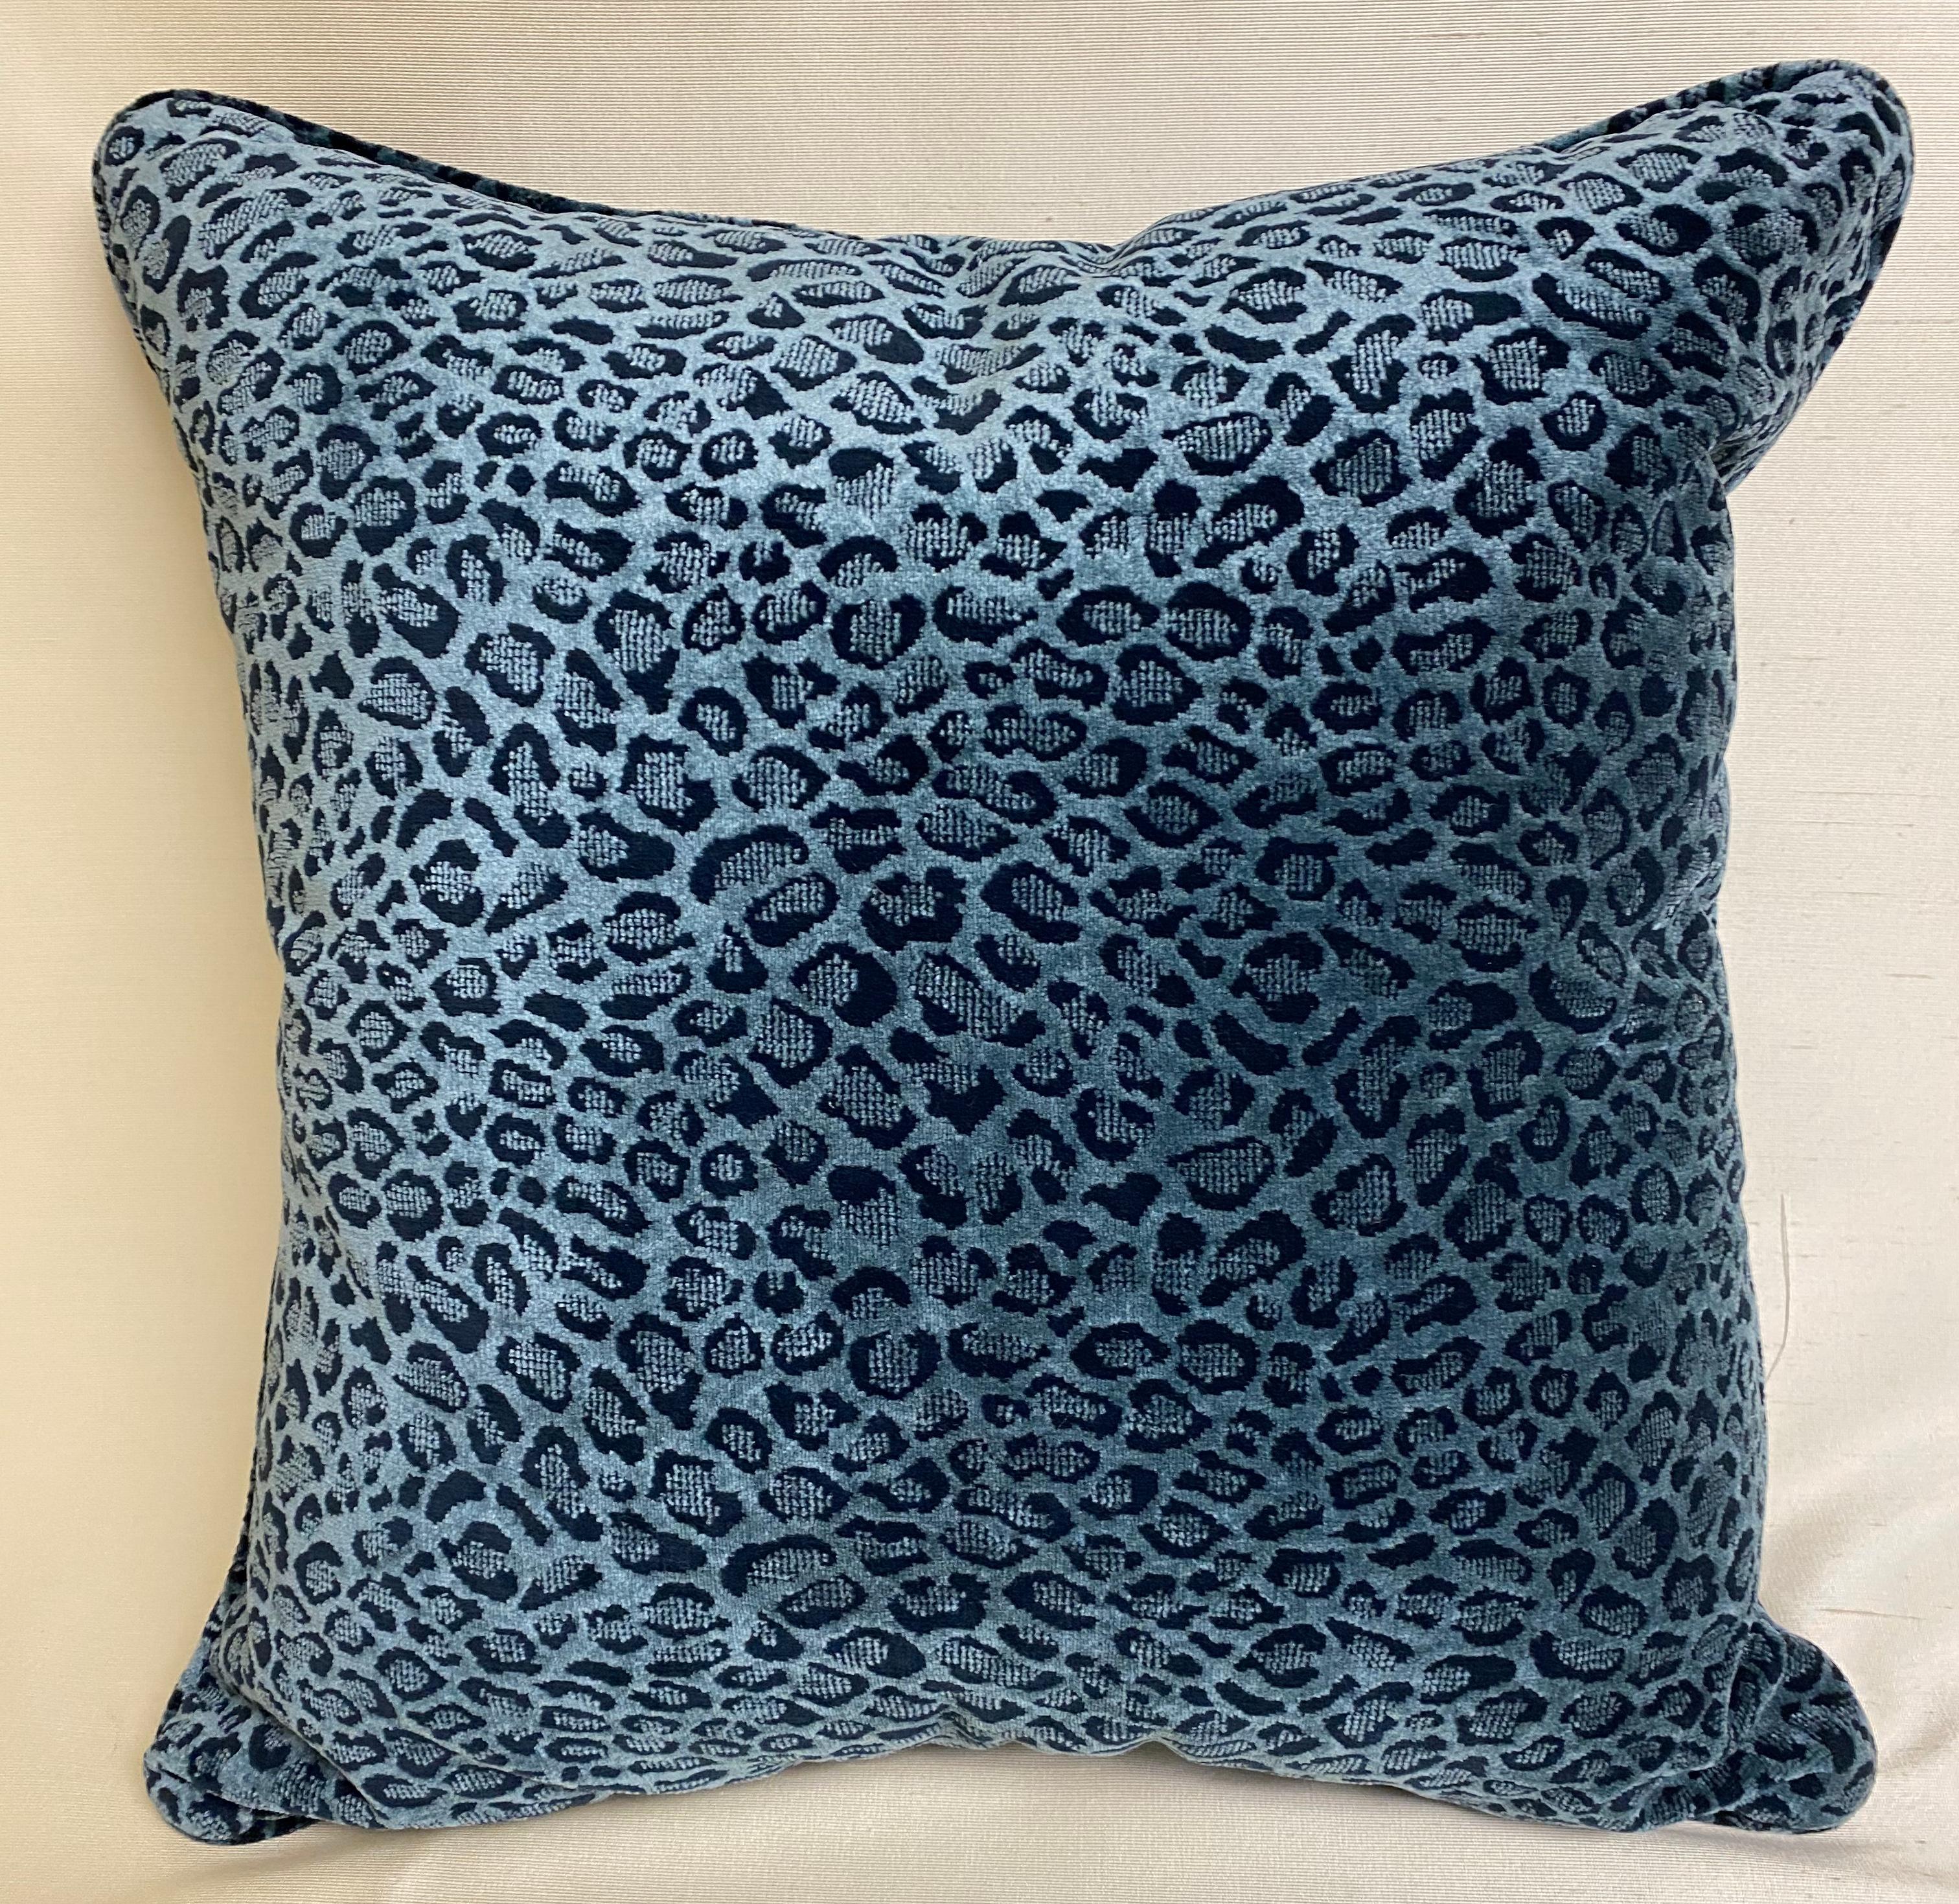 Decorative pair of down-filled animal print cushions
Print on both sides
Measures: 20 inches square.